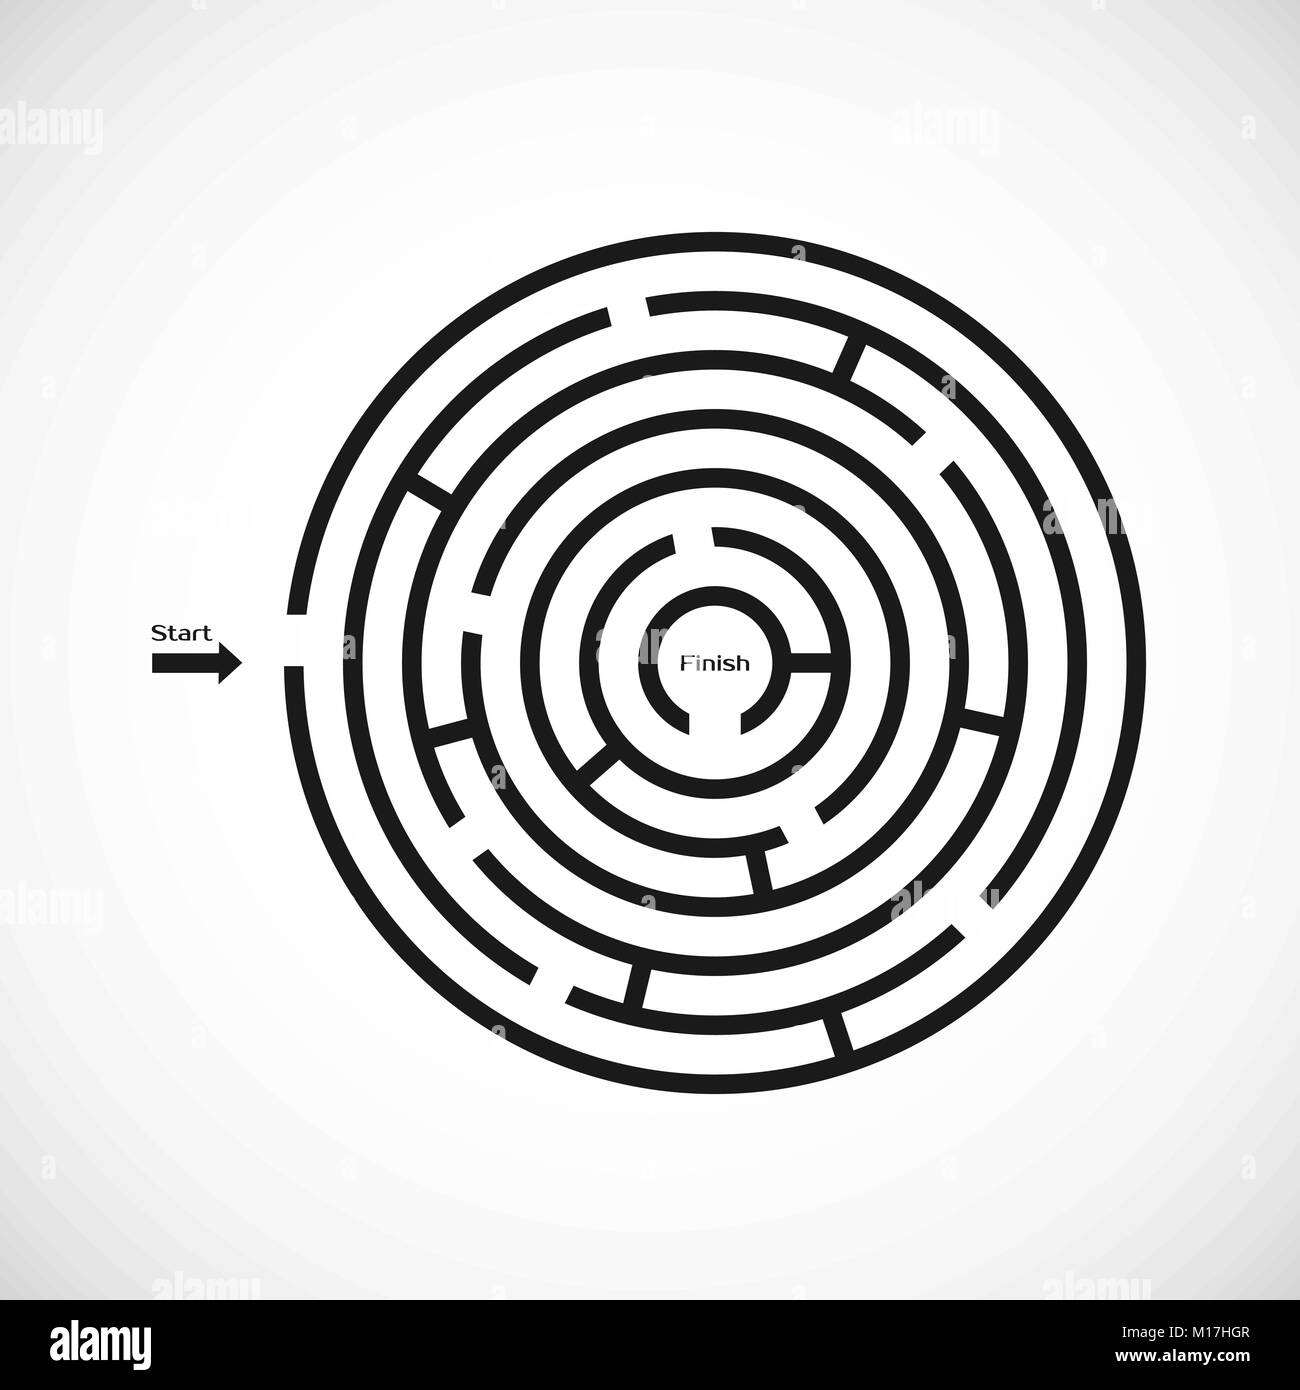 Abstract maze labyrinth icon. Circular labyrinth shape design element. Vector illustration isolated on white background Stock Vector